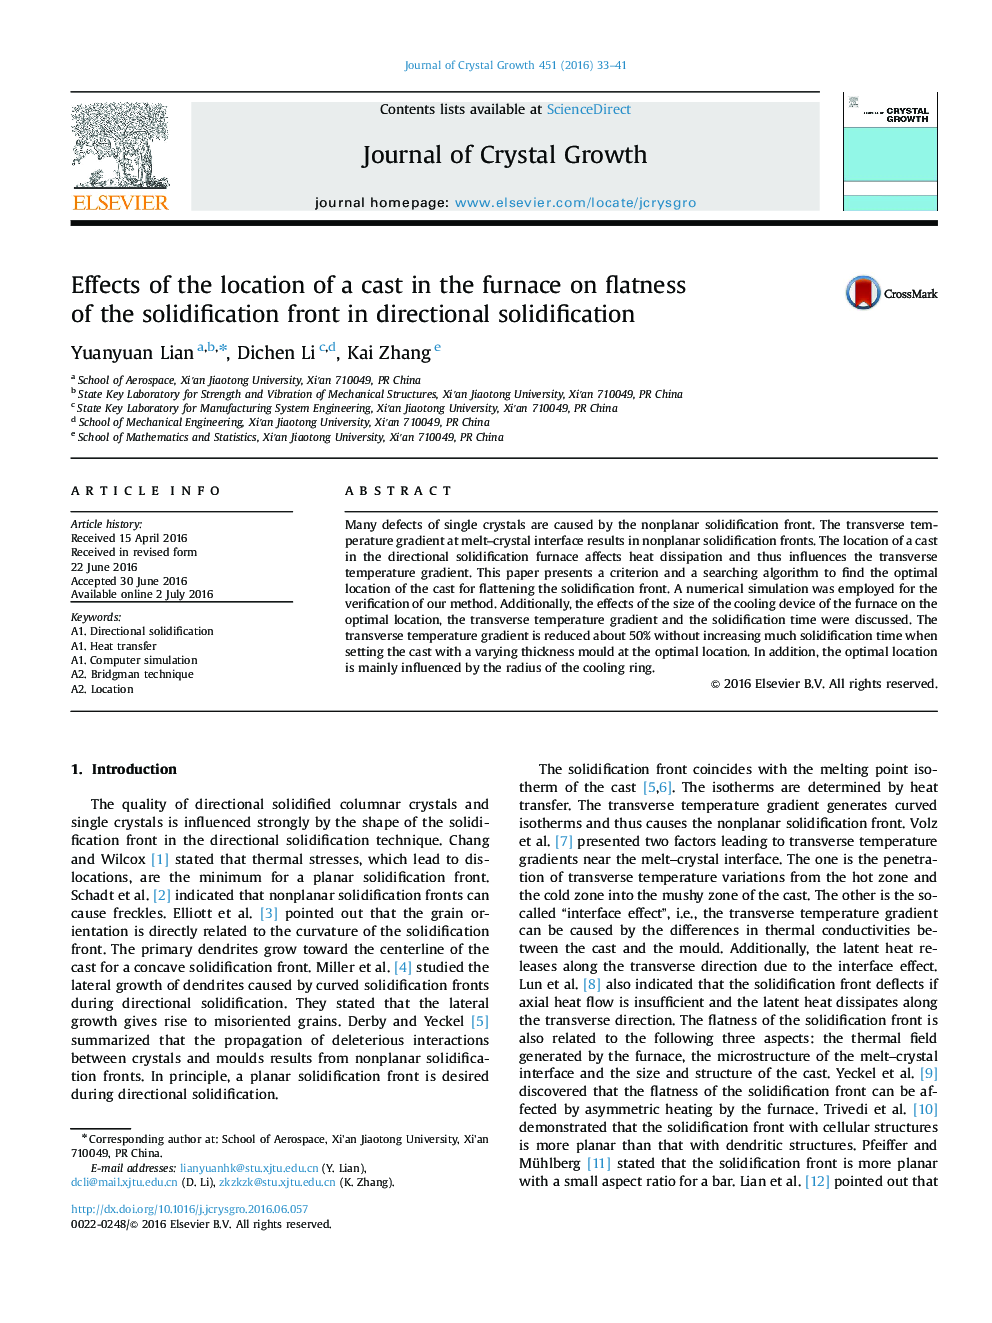 Effects of the location of a cast in the furnace on flatness of the solidification front in directional solidification